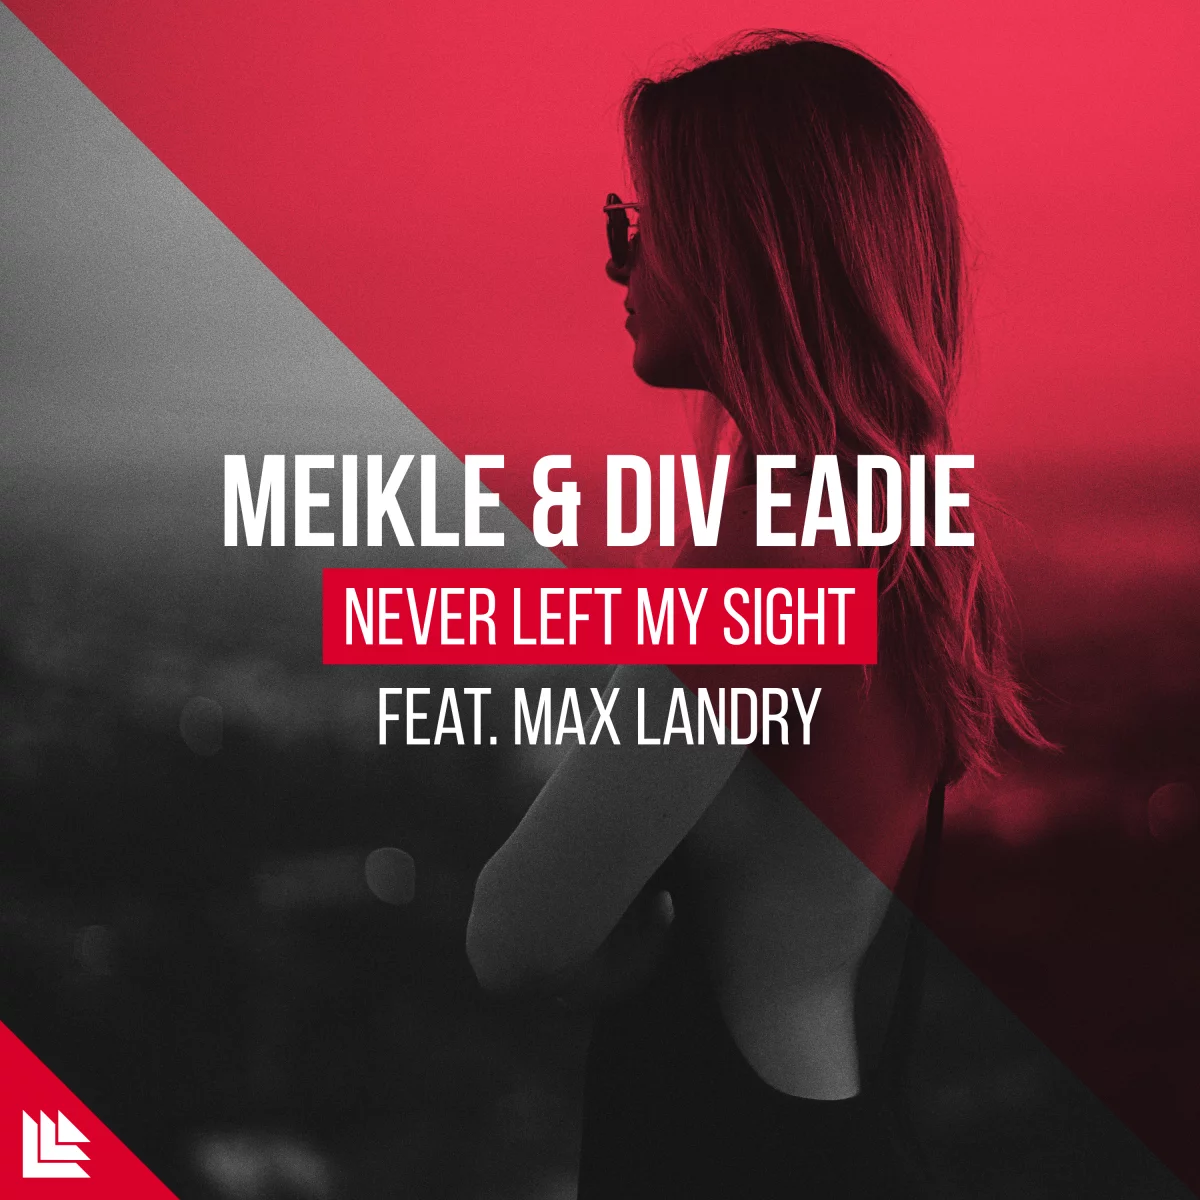 Never Left My Sight (feat. Max Landry) - Meikle⁠ & Div Eadie⁠ feat Max Landry⁠ 